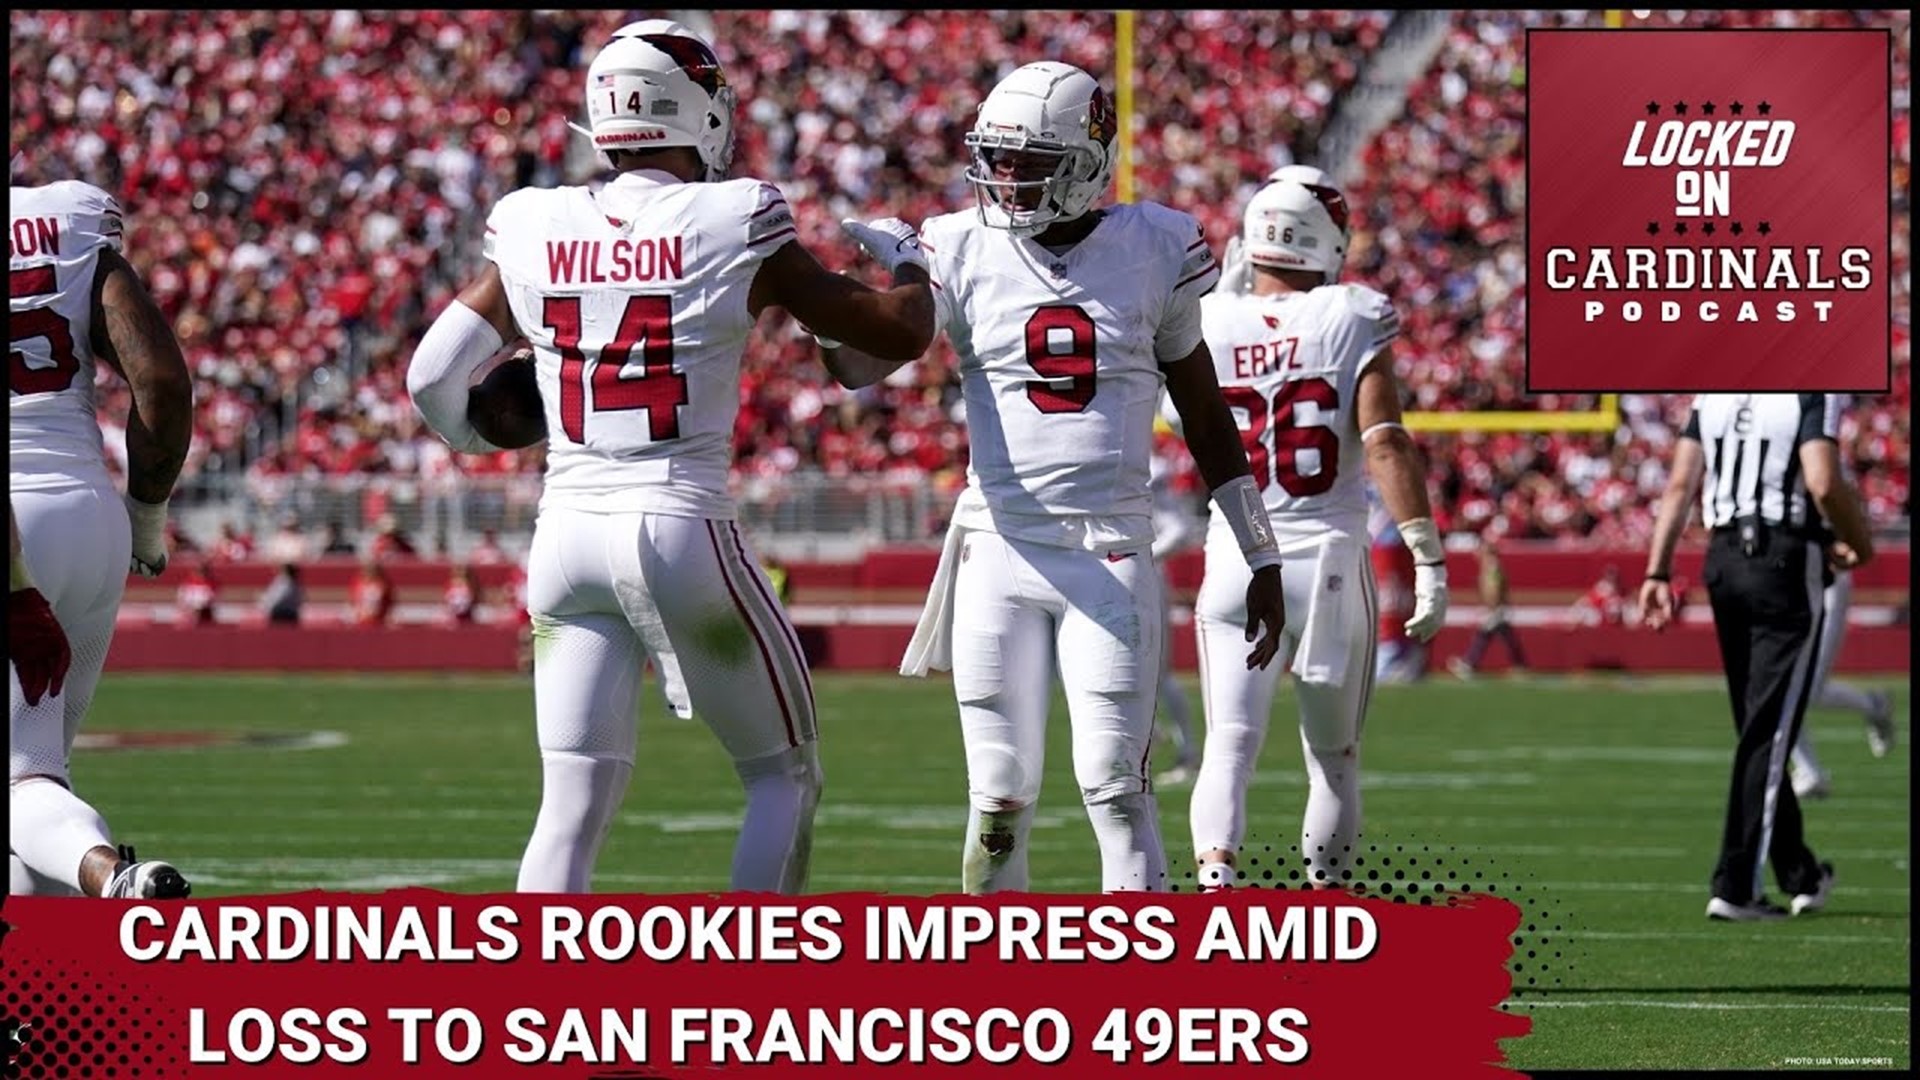 Arizona Cardinals dropped to 1-3 after a 36-15 loss to the San Francisco 49ers, however, the game seemed much closer at times than the final score